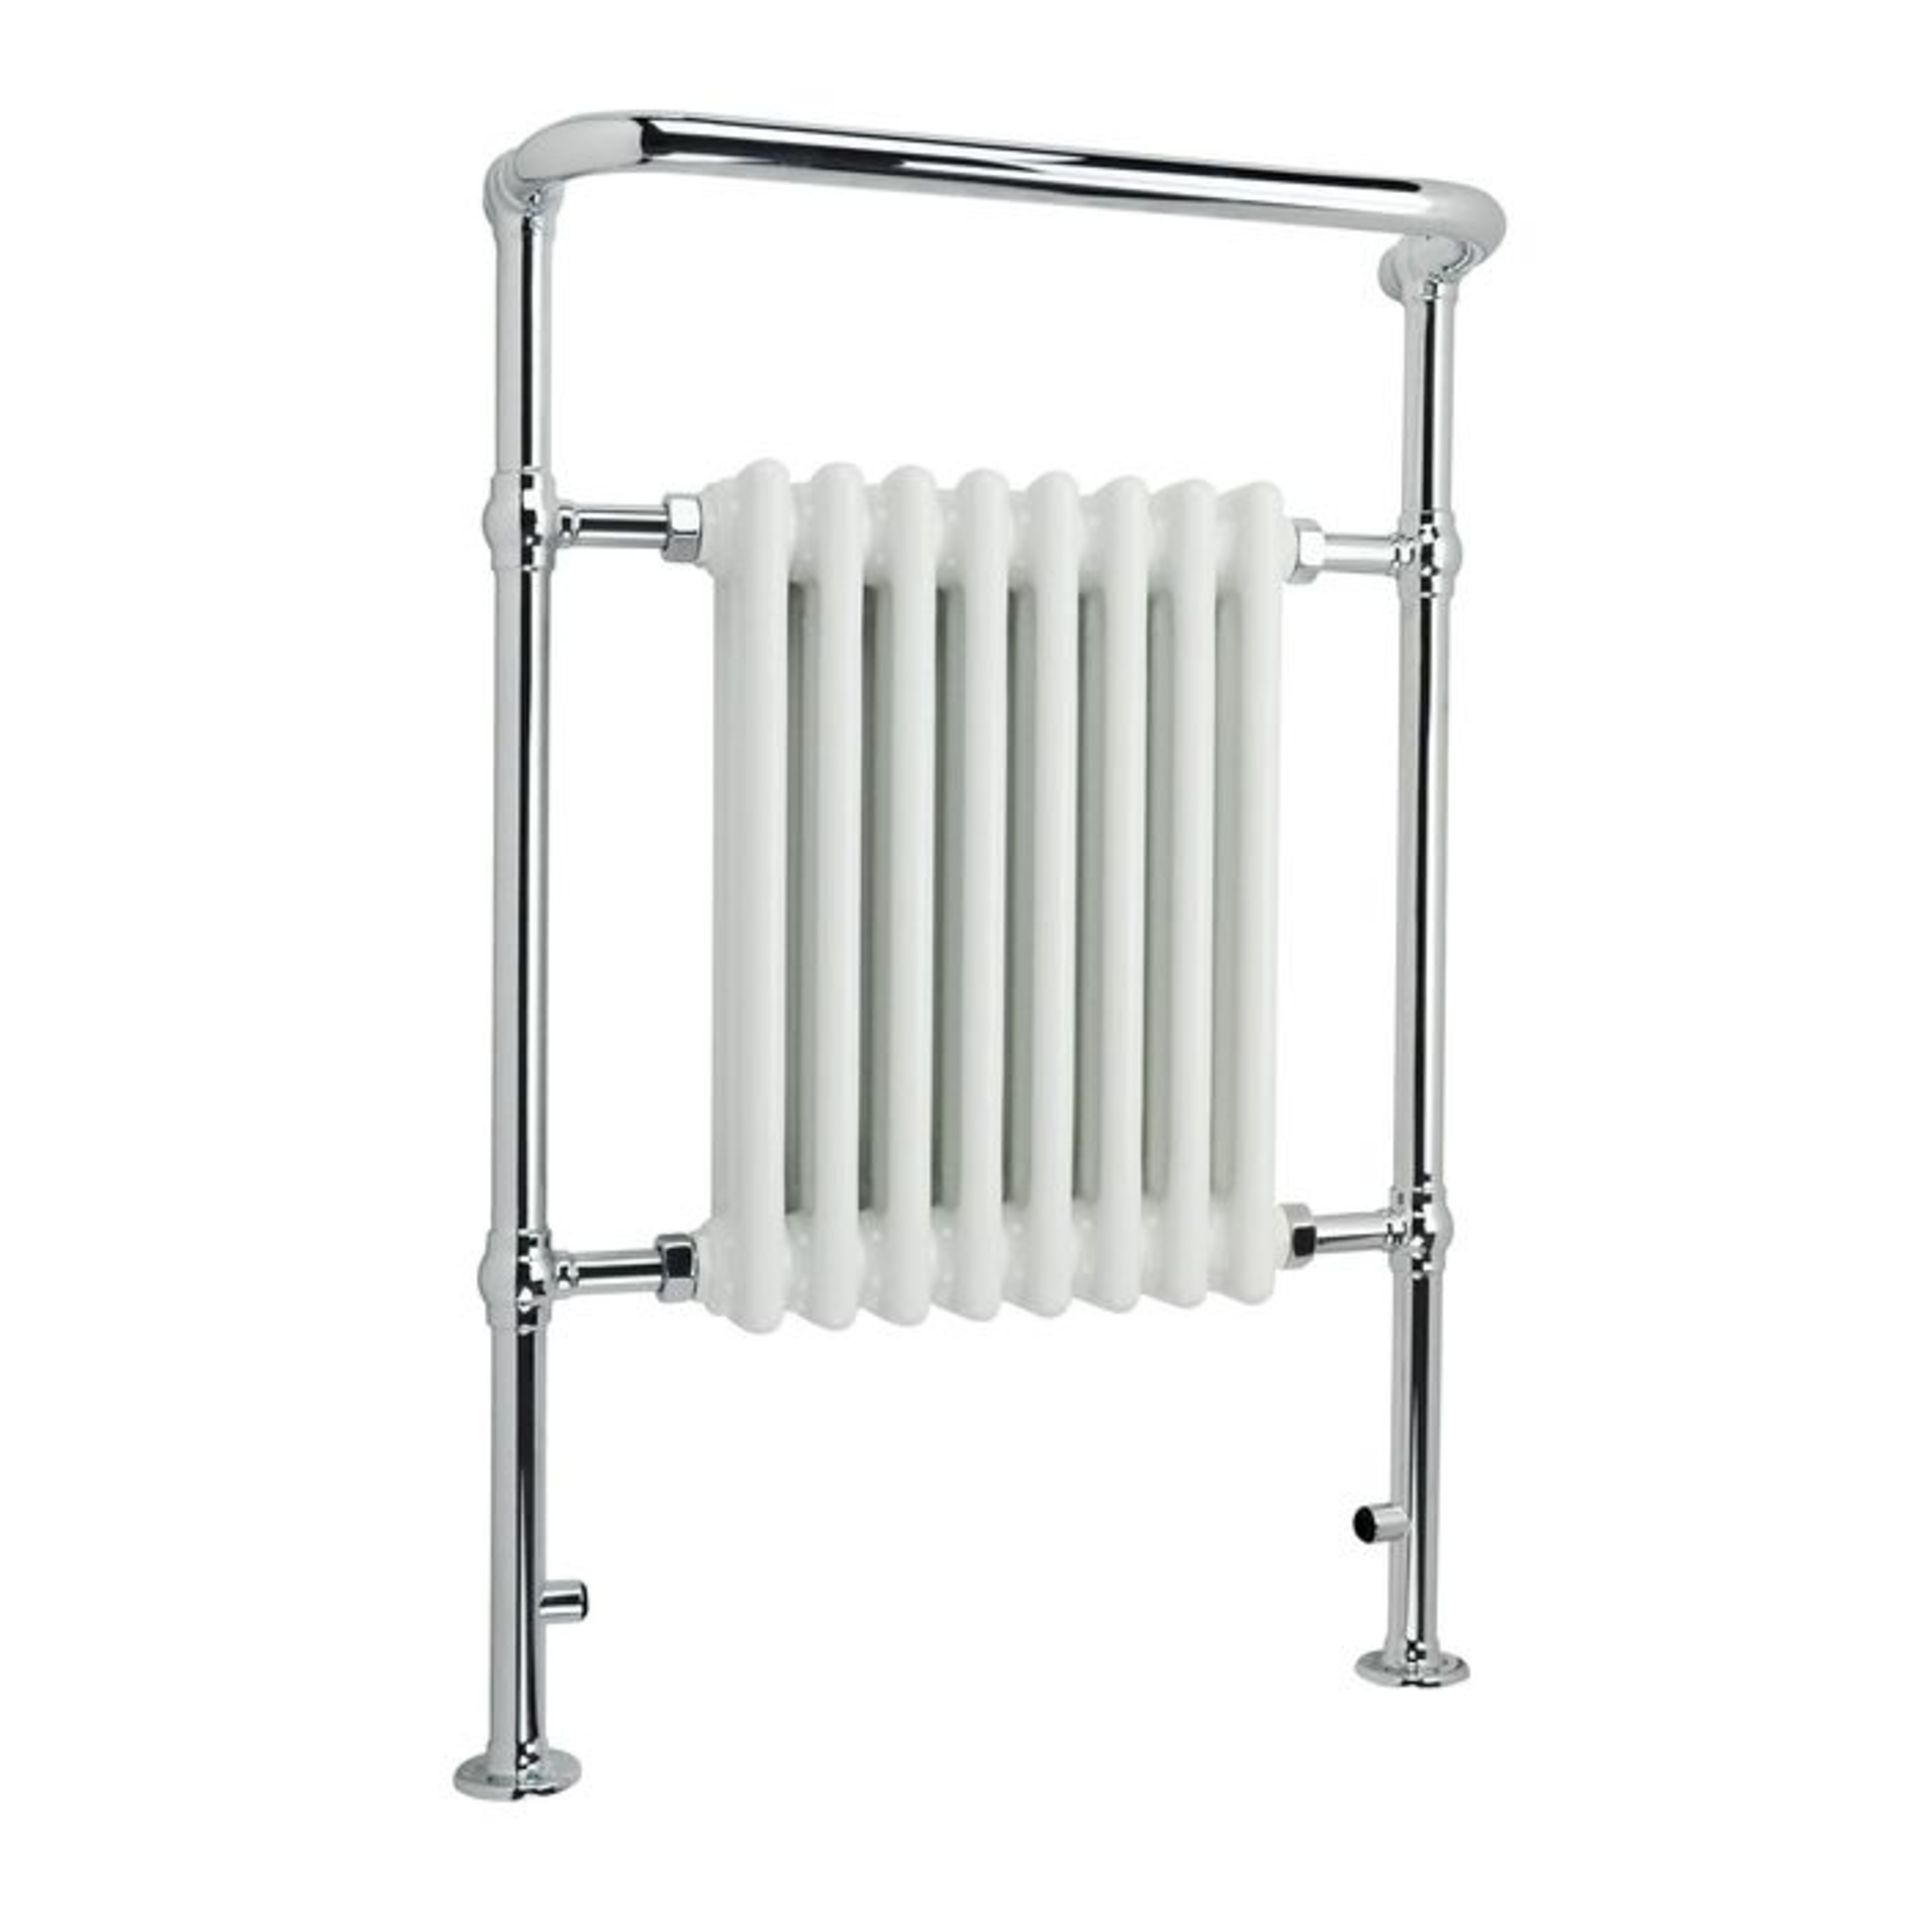 (L33) 952x659mm Large Traditional White Premium Towel Rail Radiator. RRP £341.99. We love this - Image 3 of 3